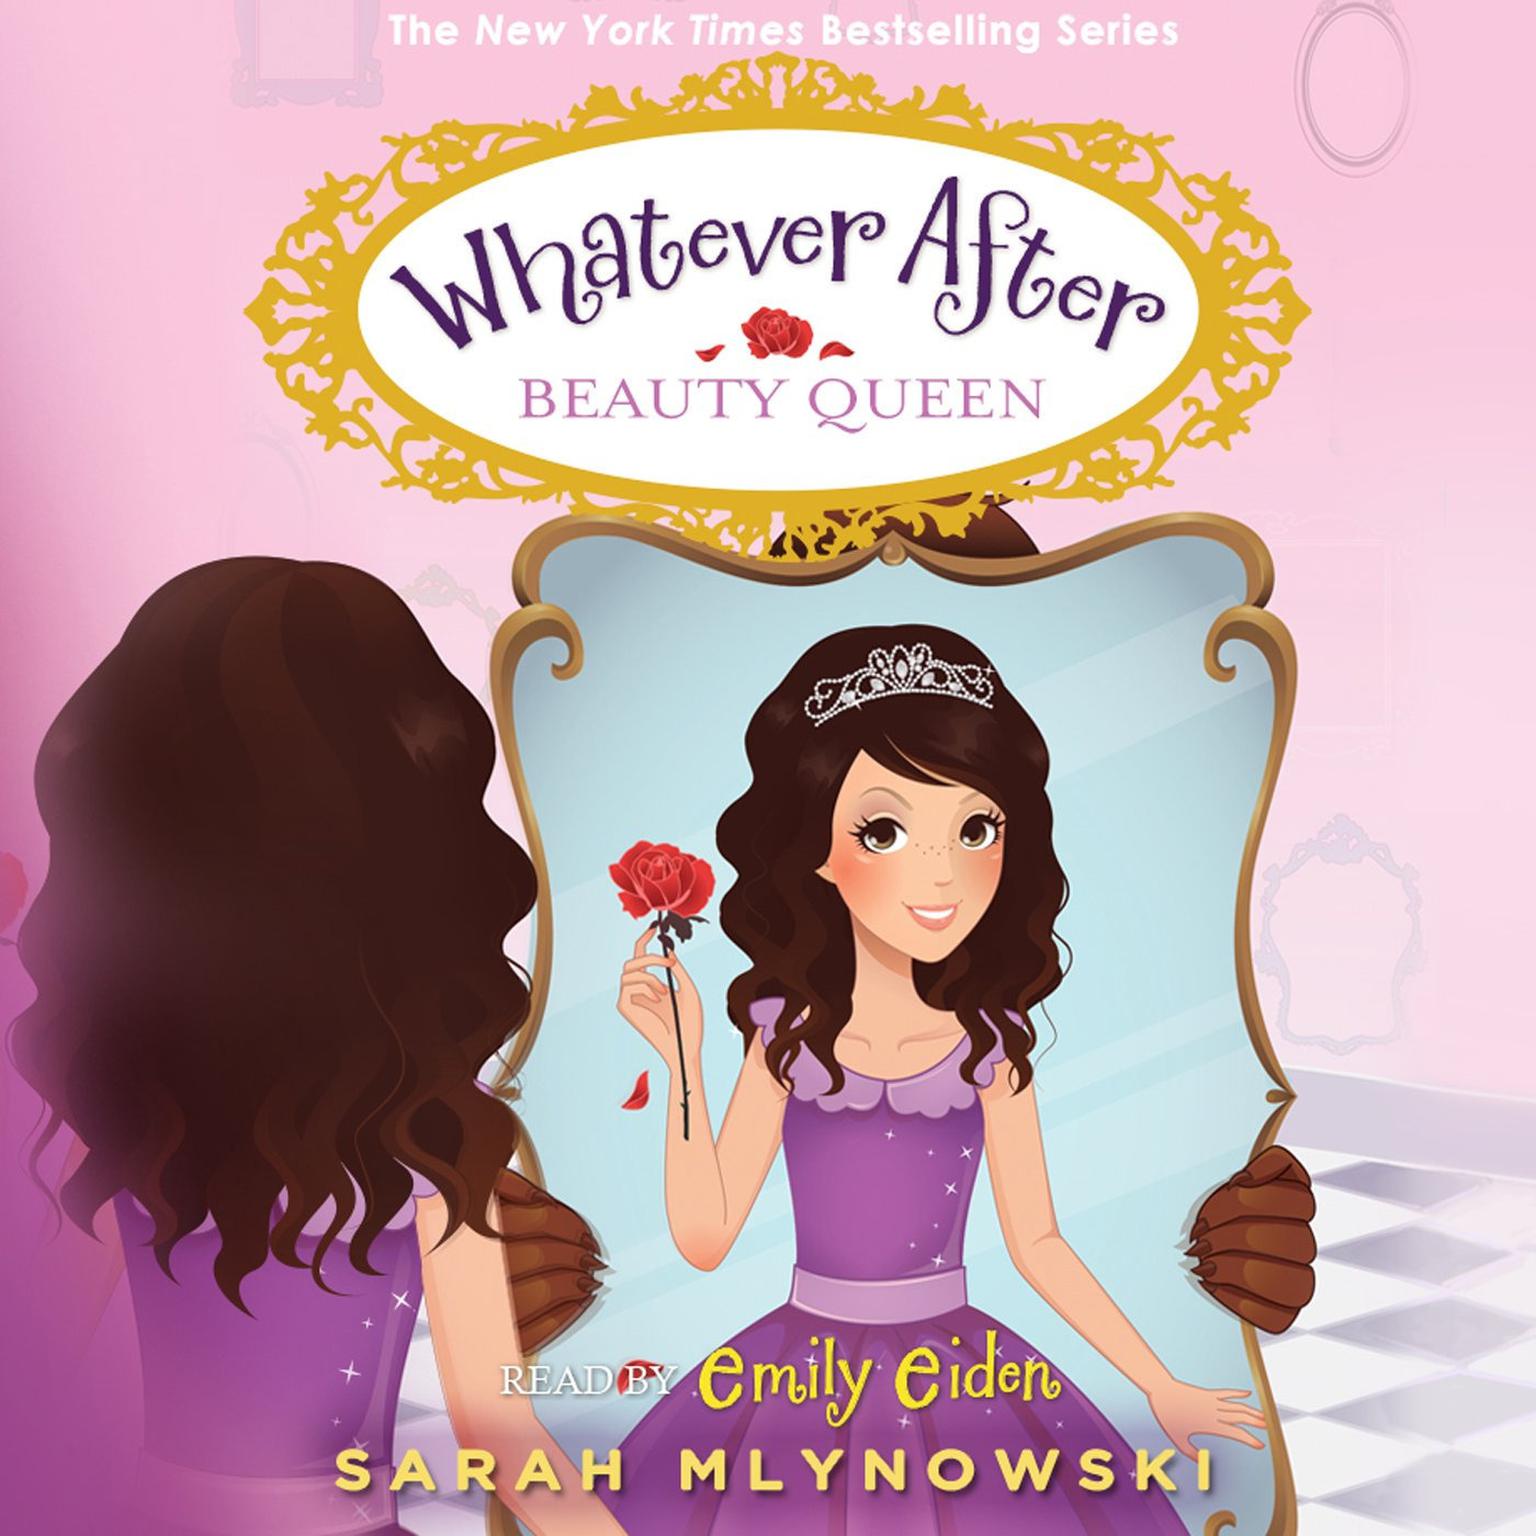 Beauty Queen (Whatever After #7) Audiobook, by Sarah Mlynowski